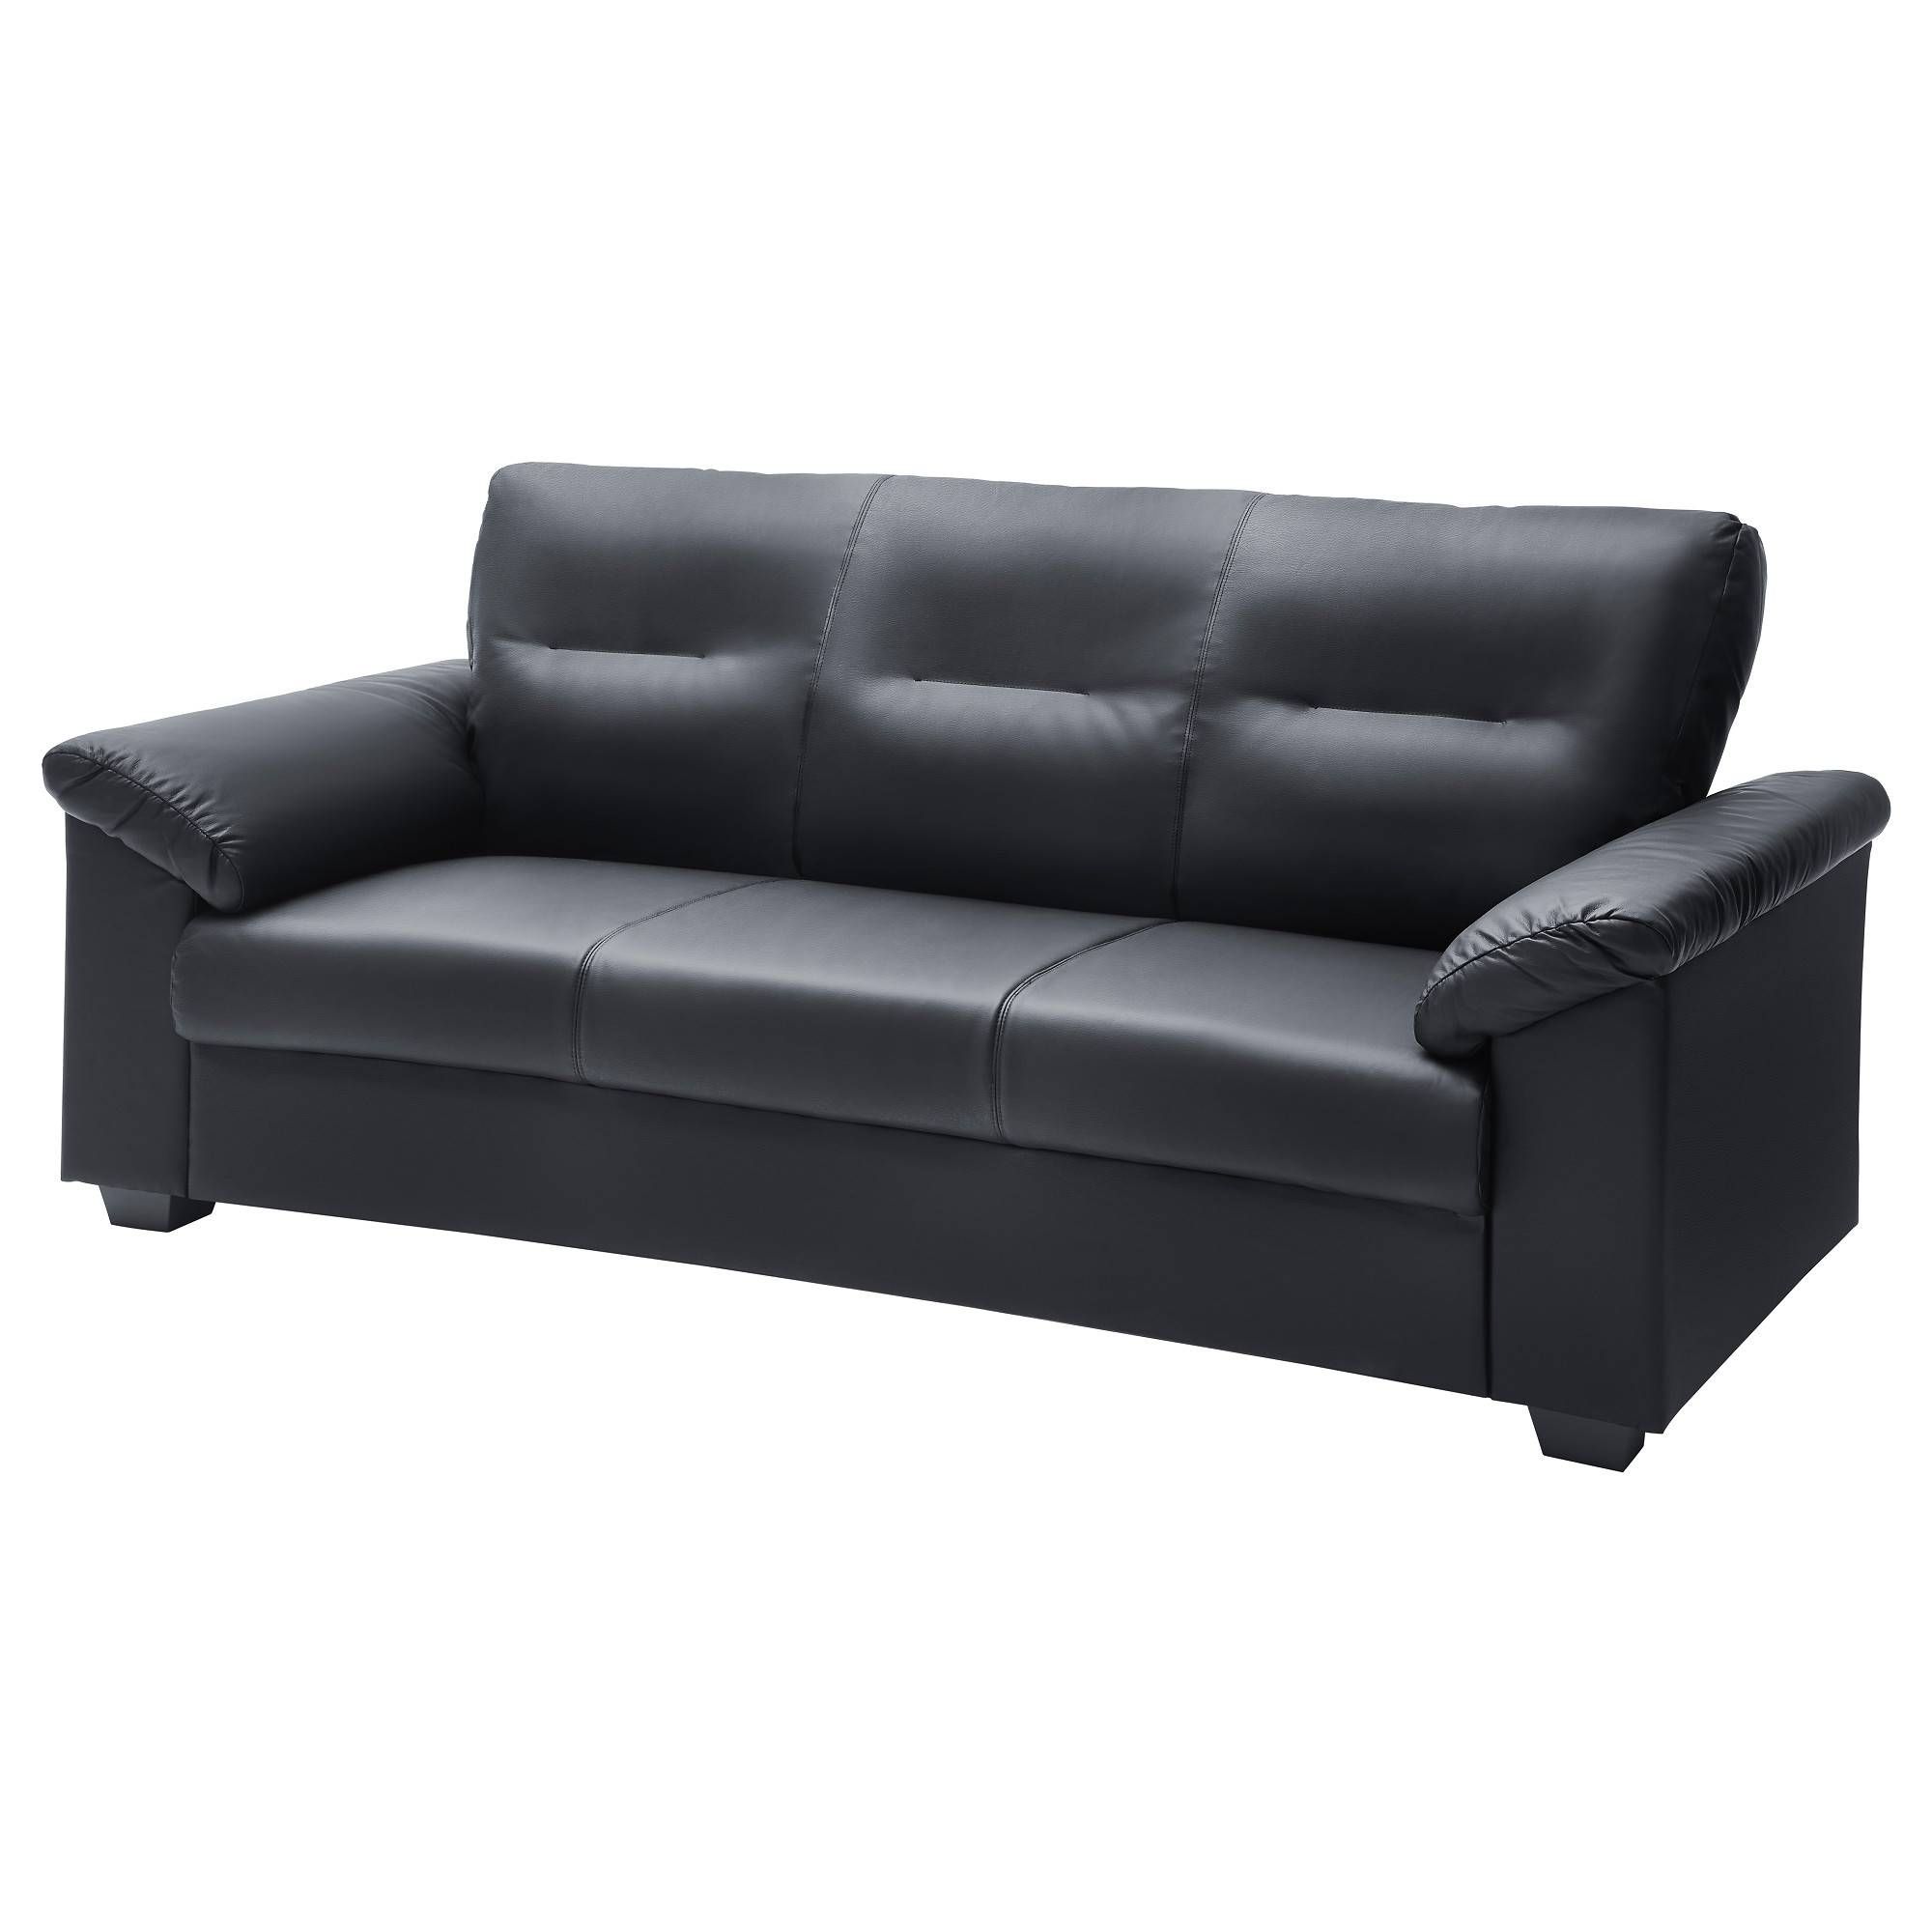 Knislinge Sofa – Ikea For Leather Sofas (View 9 of 30)